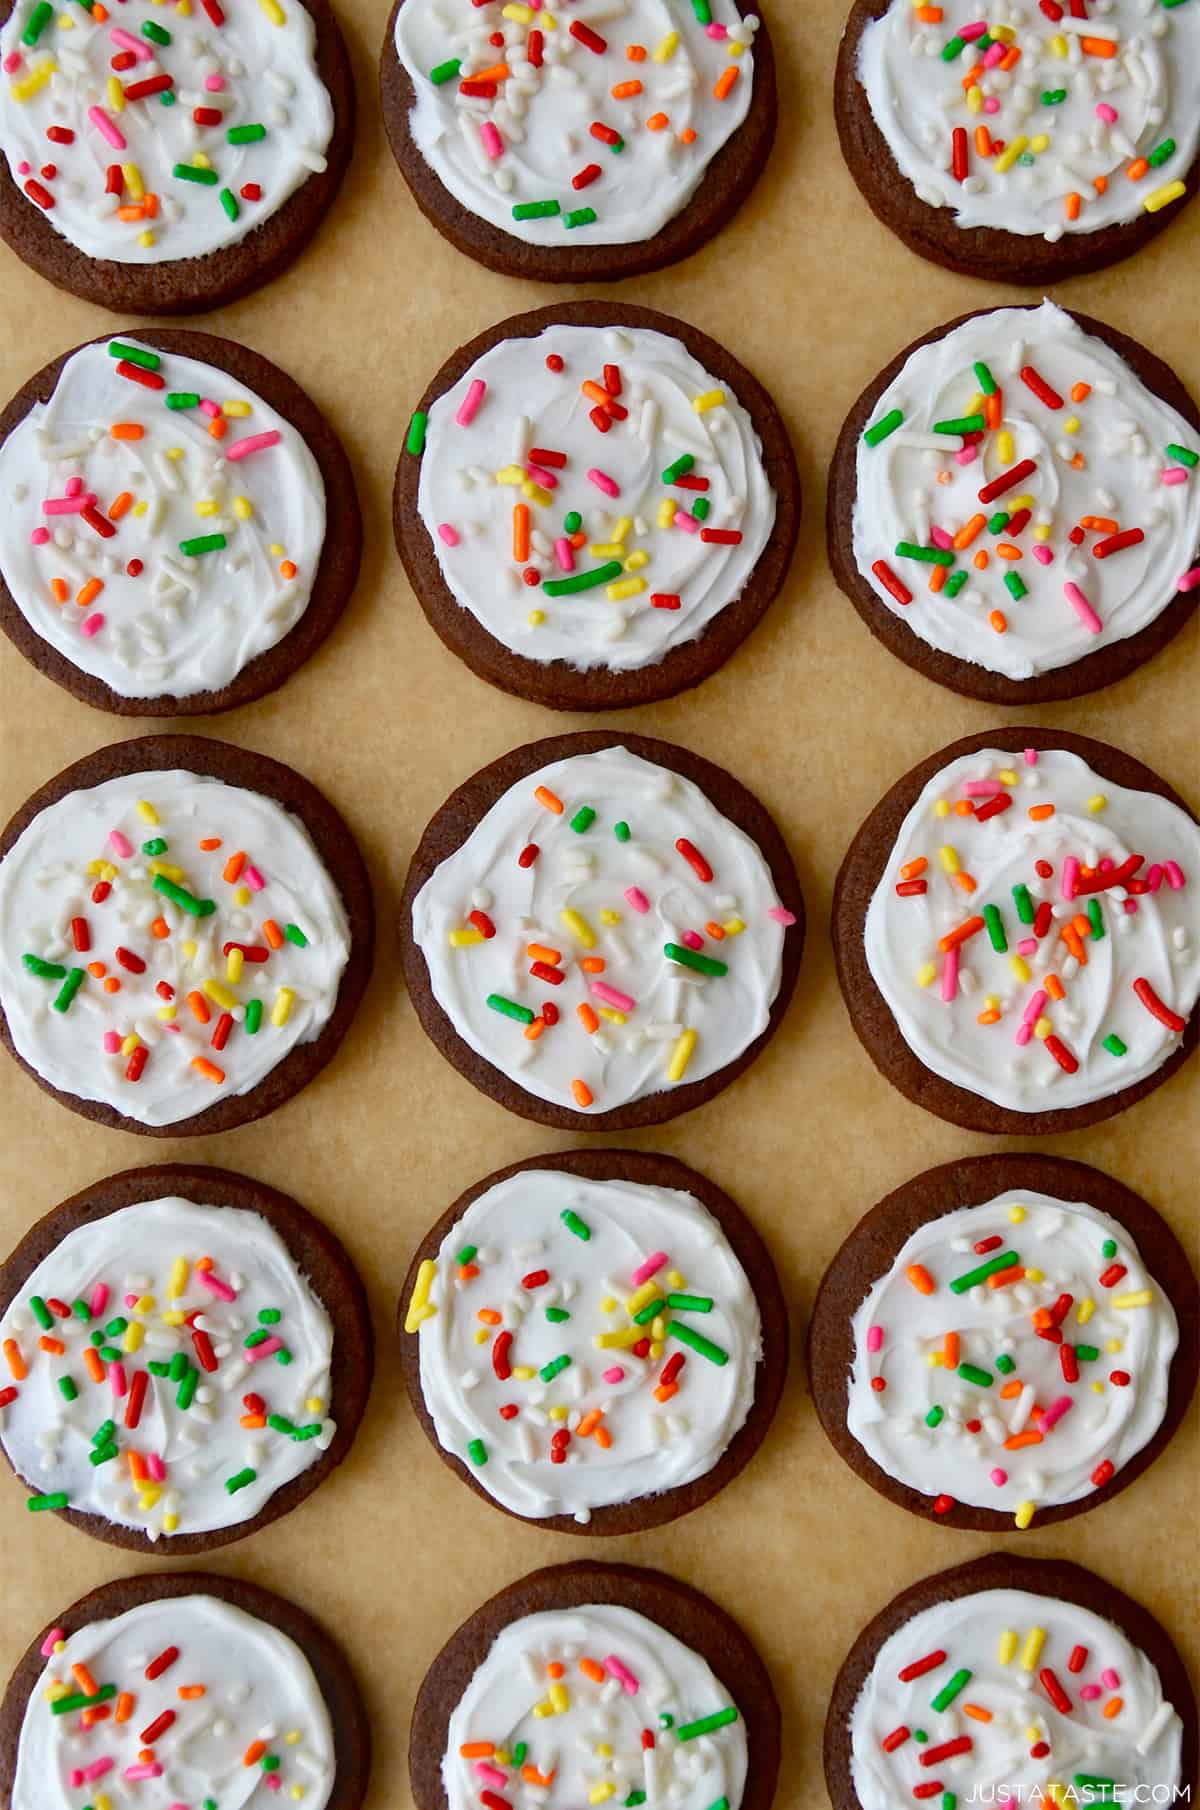 Rows of chocolate sugar cookies topped with vanilla buttercream frosting and rainbow sprinkles atop brown parchment paper.